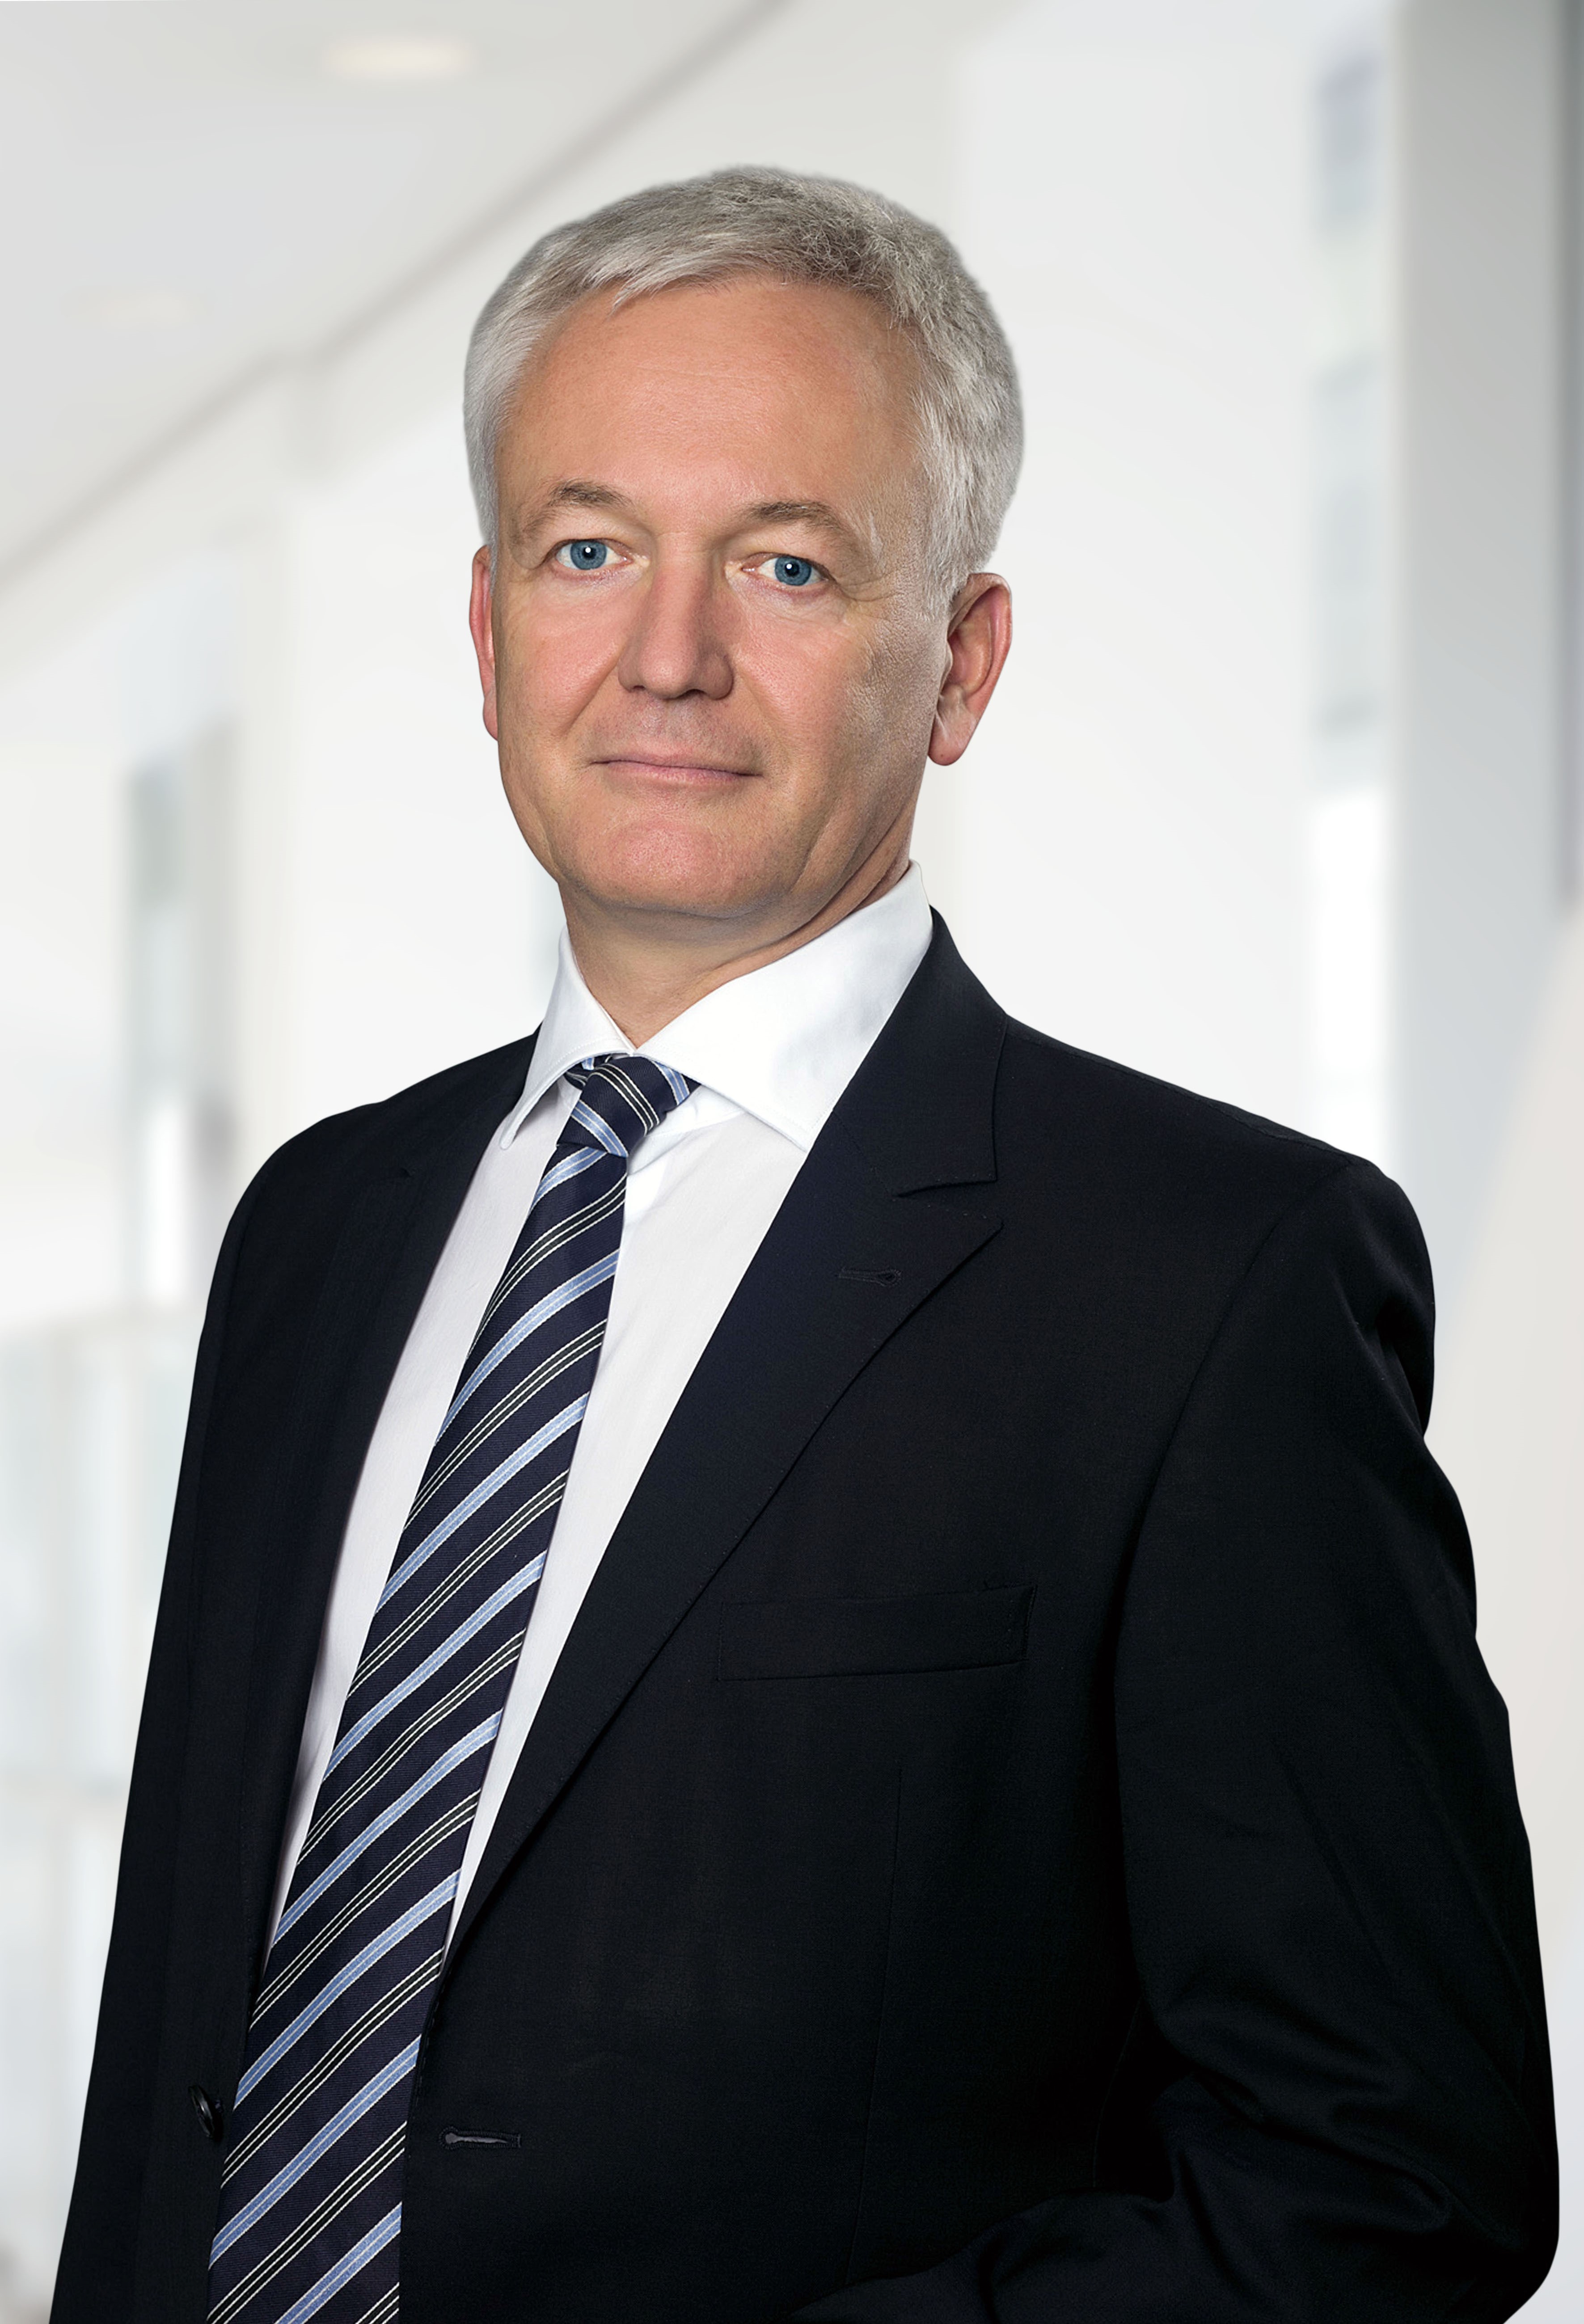 Mark Wilhelms is now Chairman of NORMA Group’s Supervisory Board